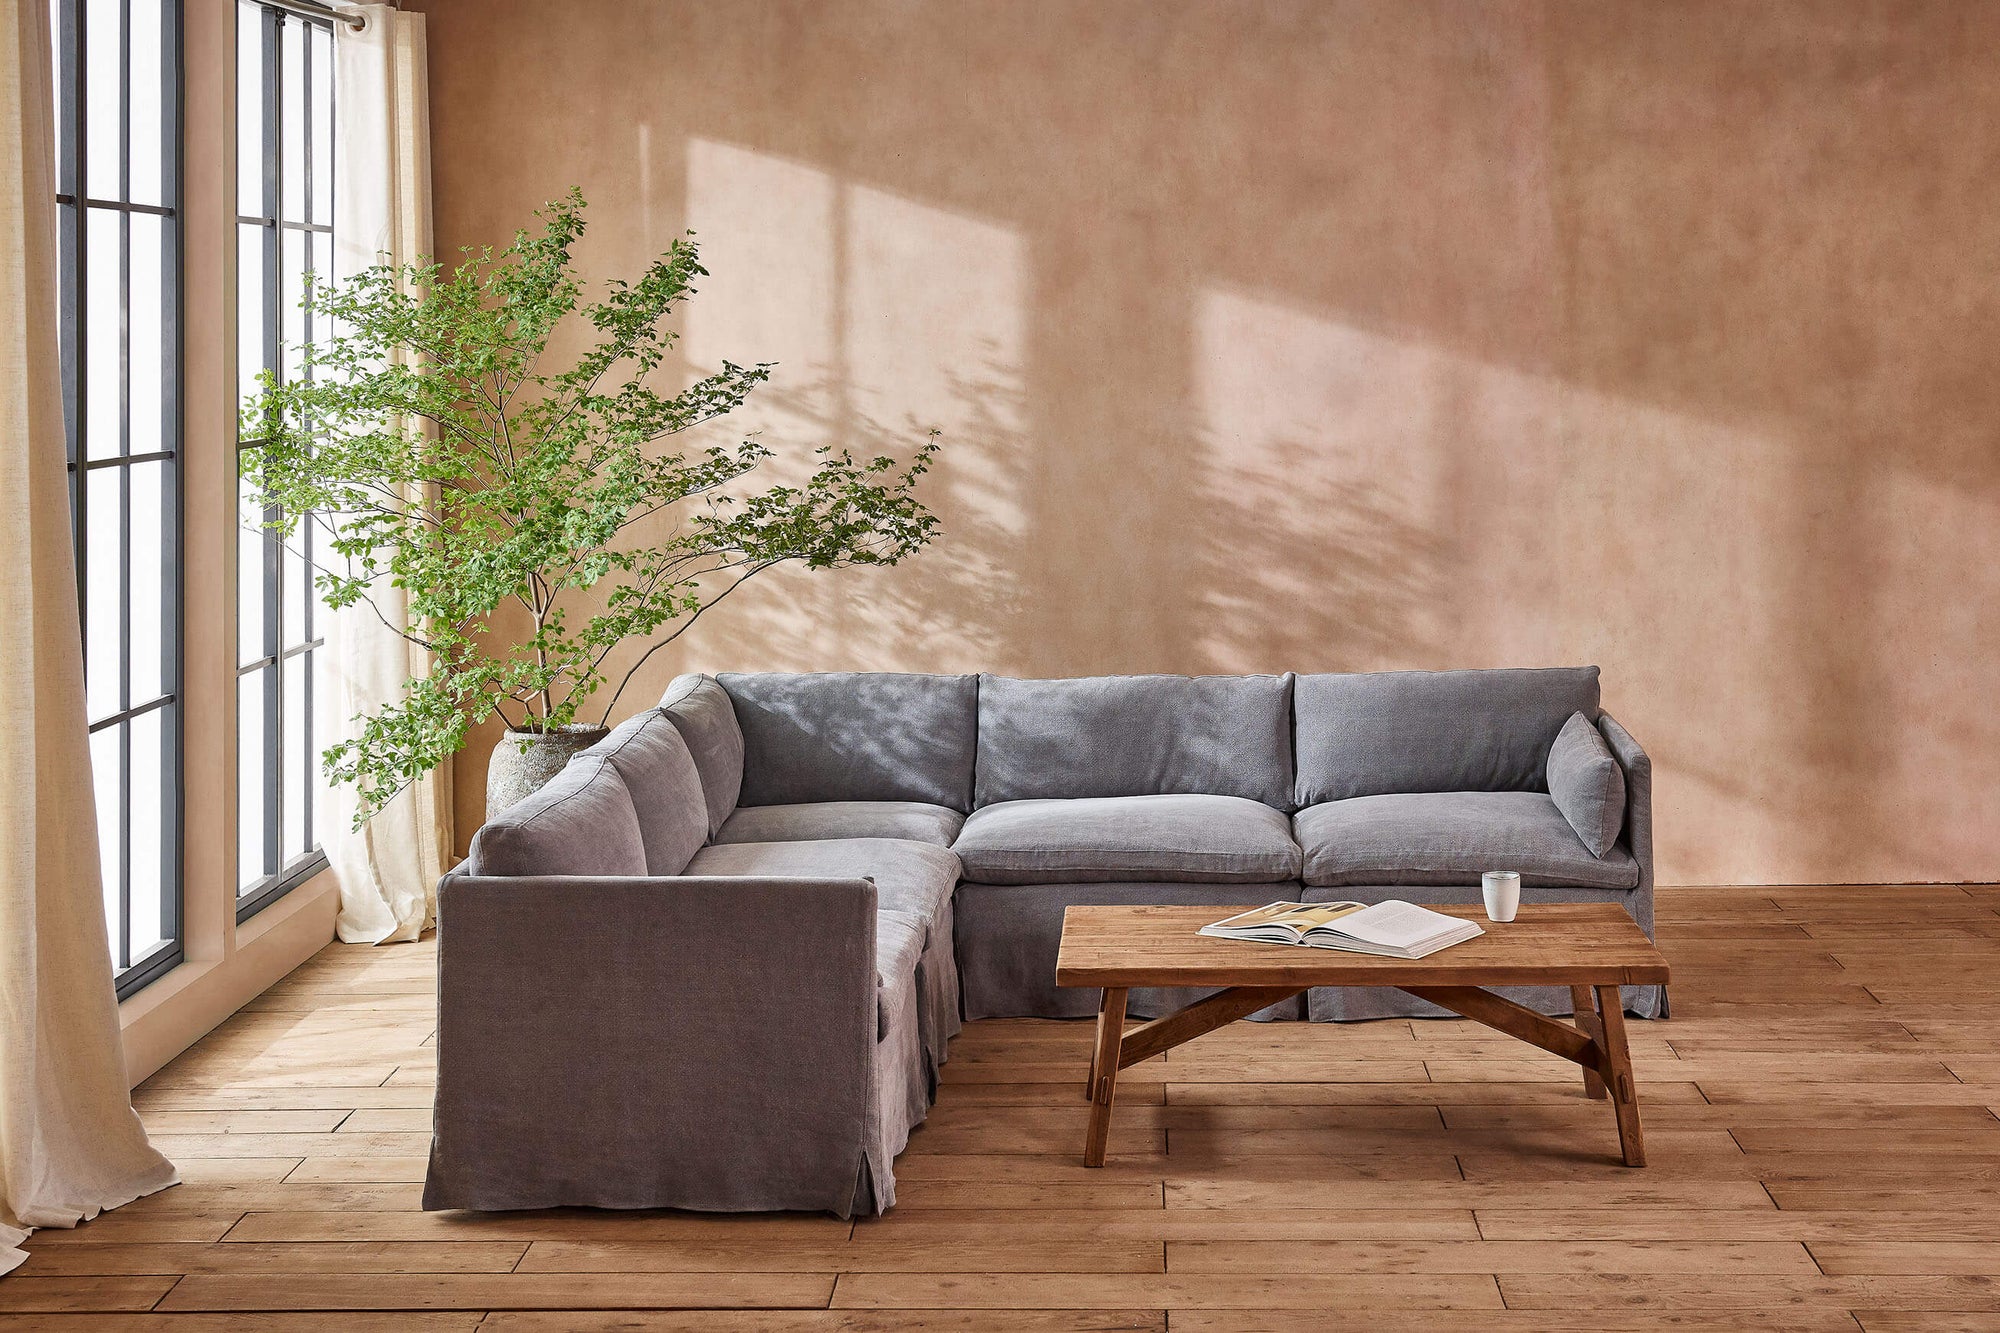 Gabriel Corner Sectional Sofa in Ink Cap, a medium cool grey Light Weight Linen, placed in a sunlit room around a coffee table